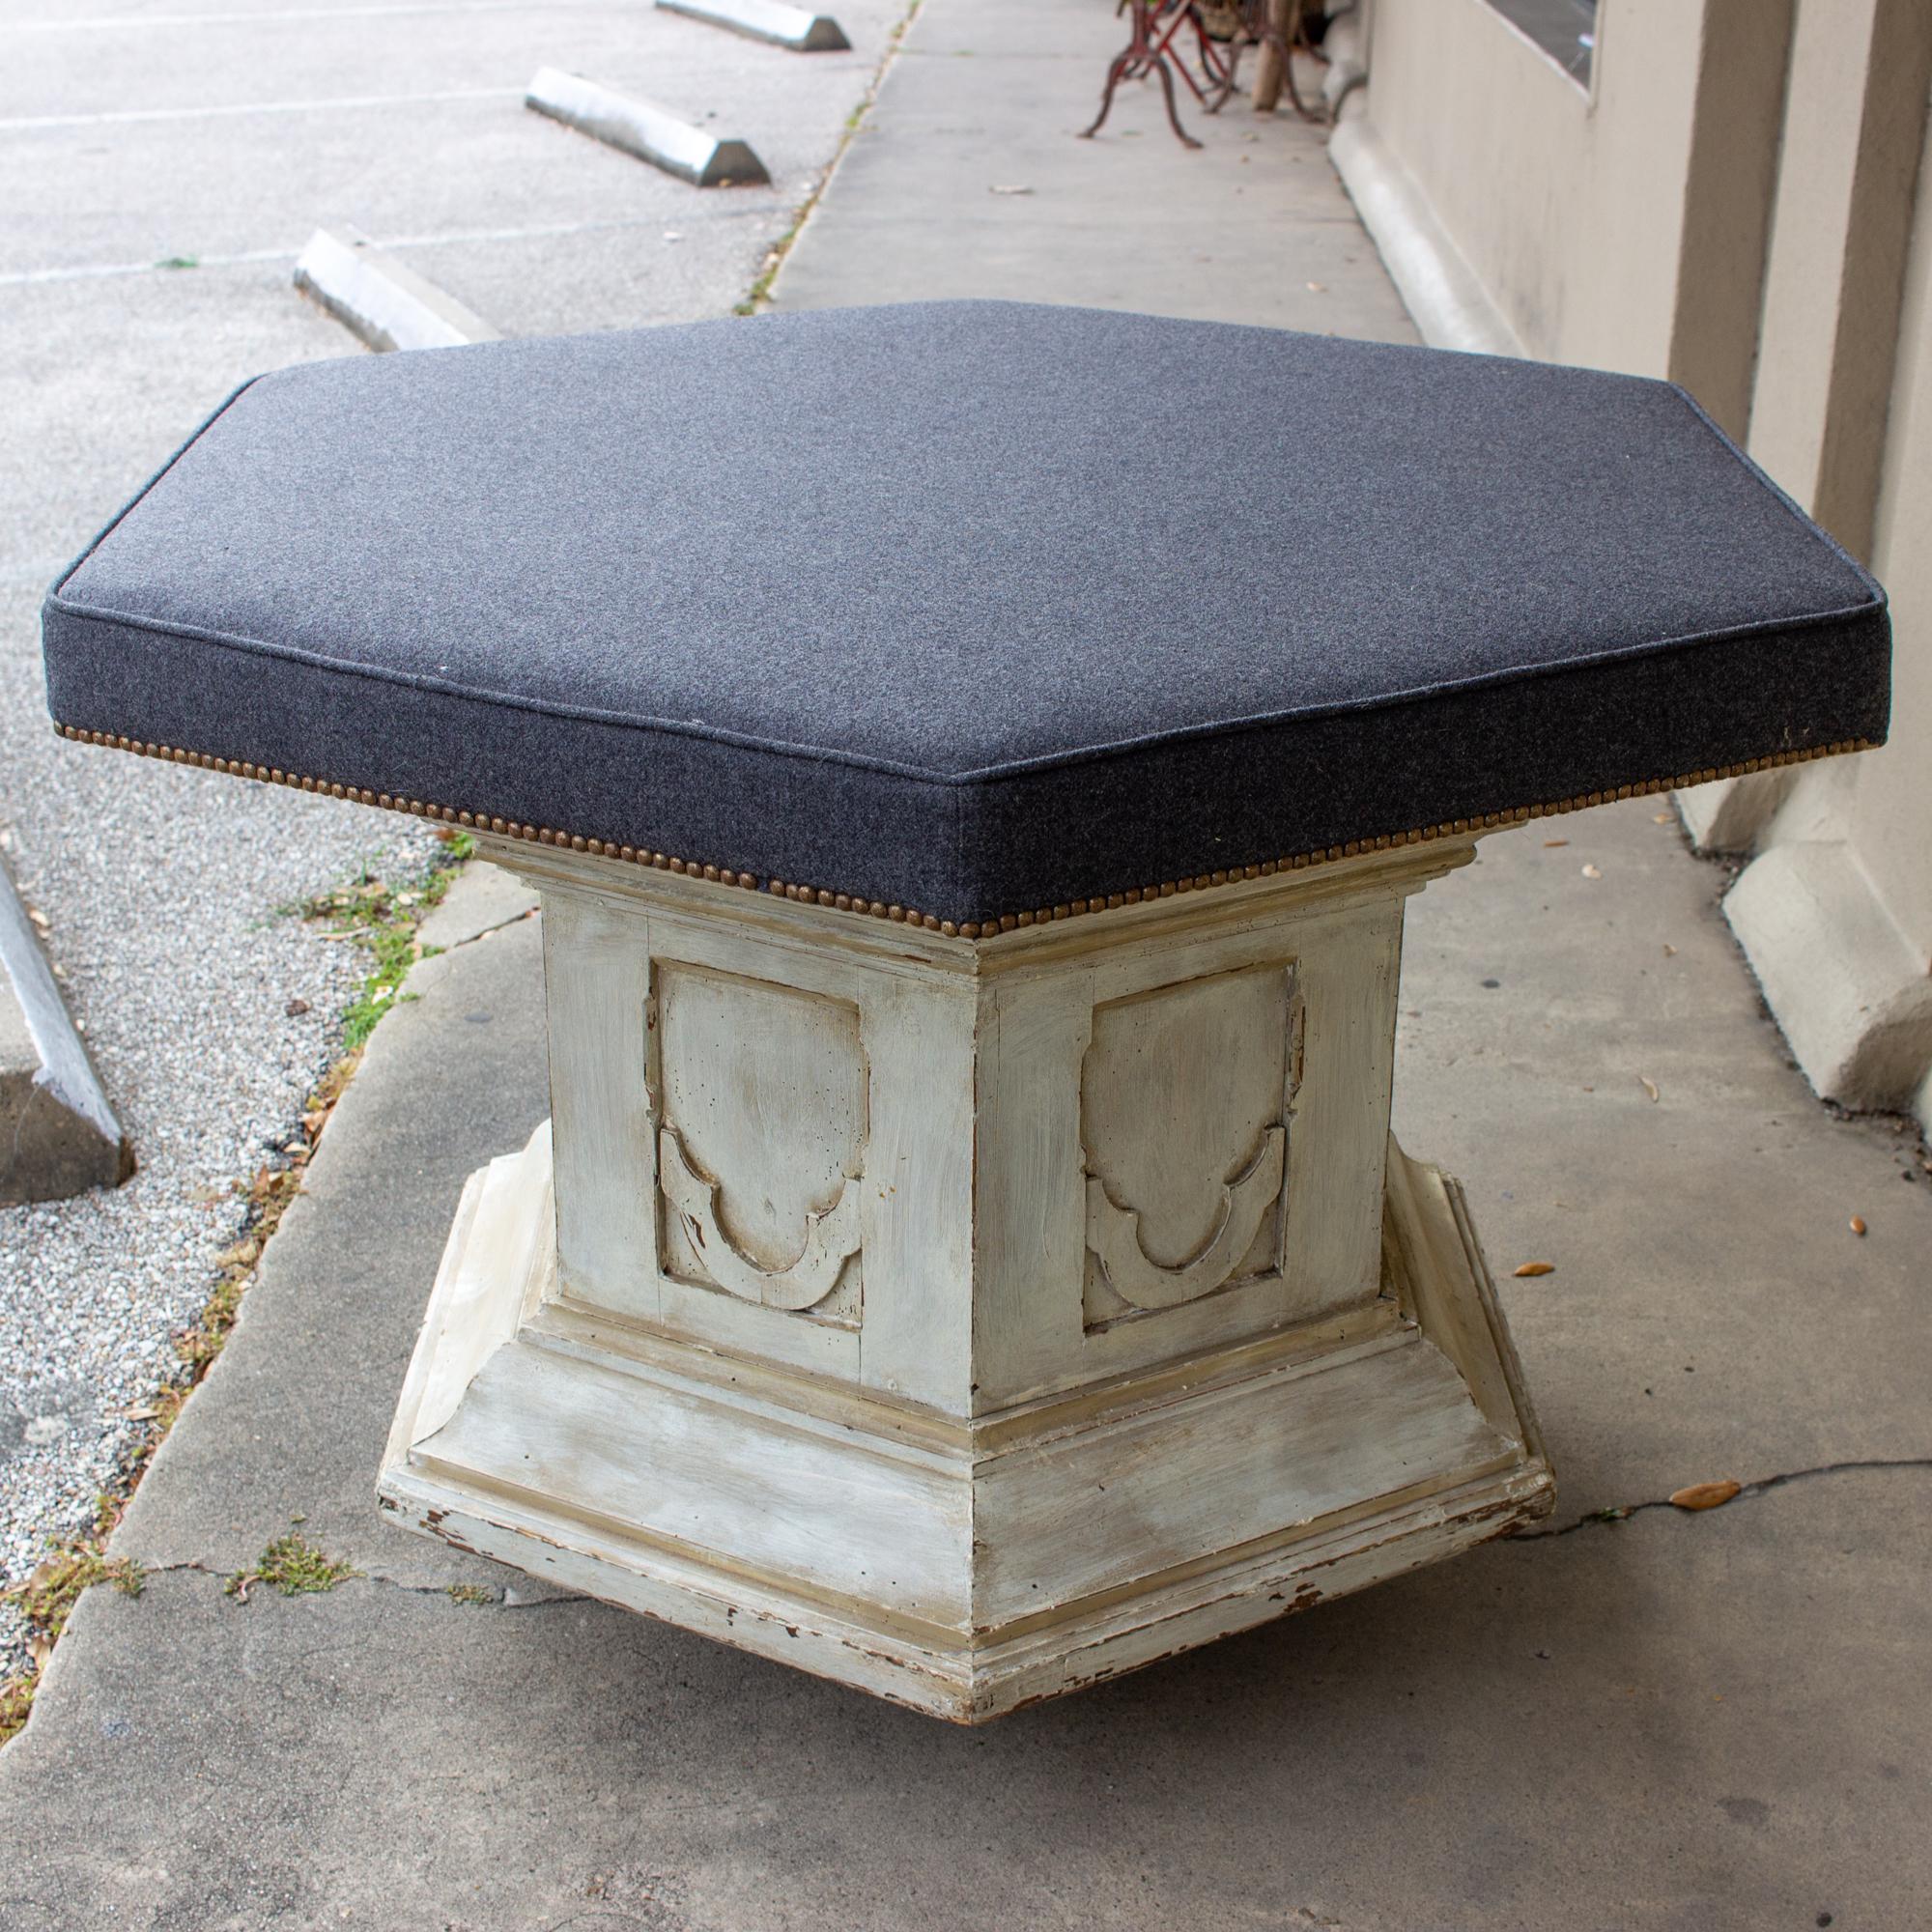 Antique French Ecclesial Hexagonal-Shaped Ottoman with Gray Wool Upholstery In Good Condition For Sale In Houston, TX